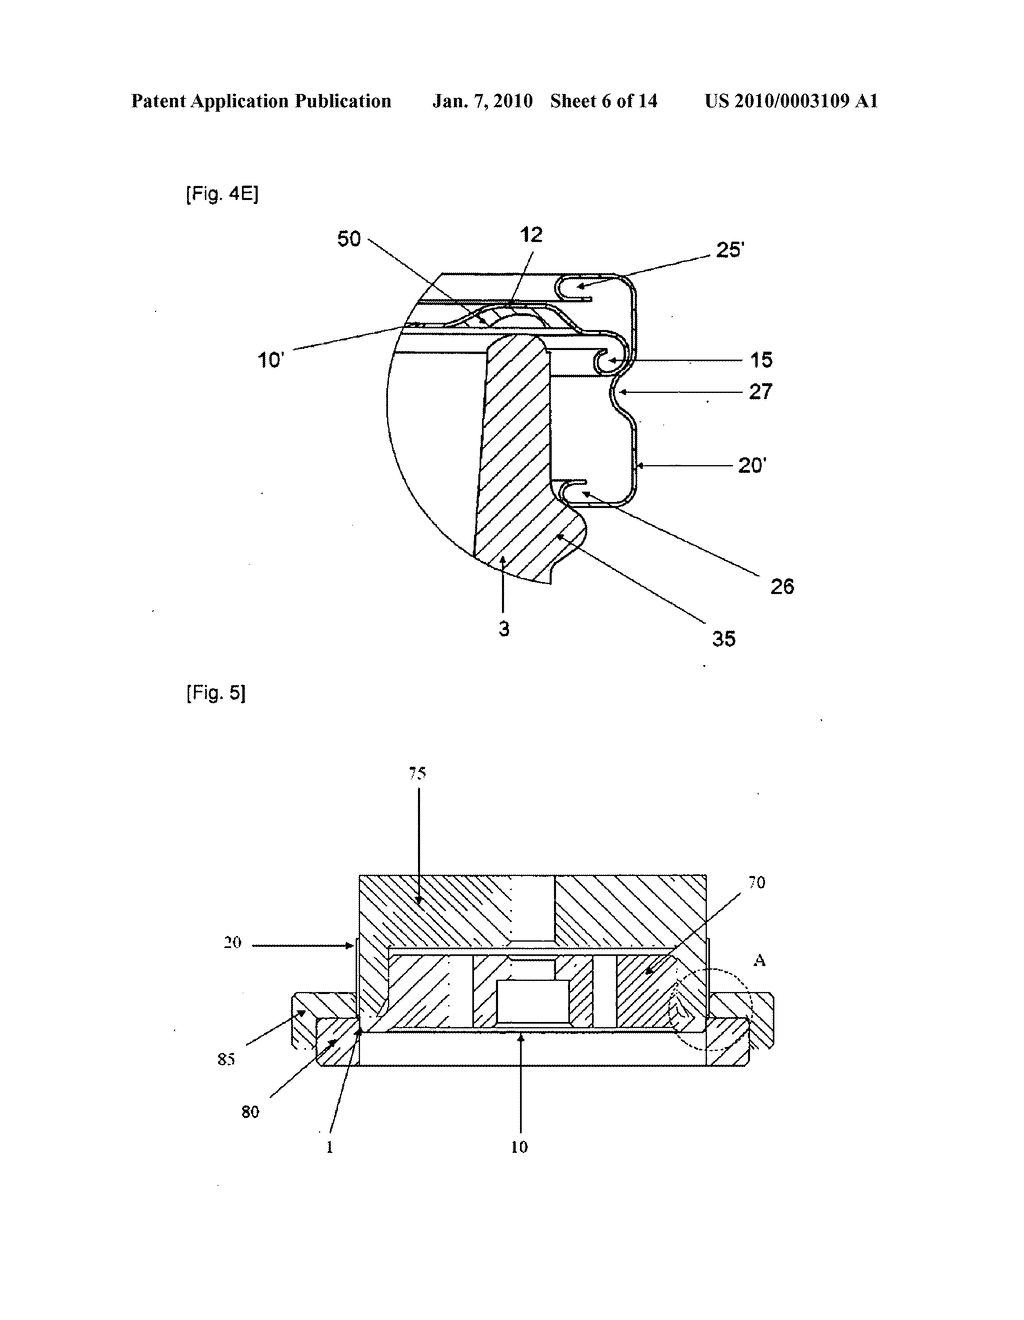 METHOD FOR PRODUCING SUCH A METAL CLOSURE WITH SEPERATE DISC AND RING FROM A SINGLE CLOSURE BLANK - diagram, schematic, and image 07